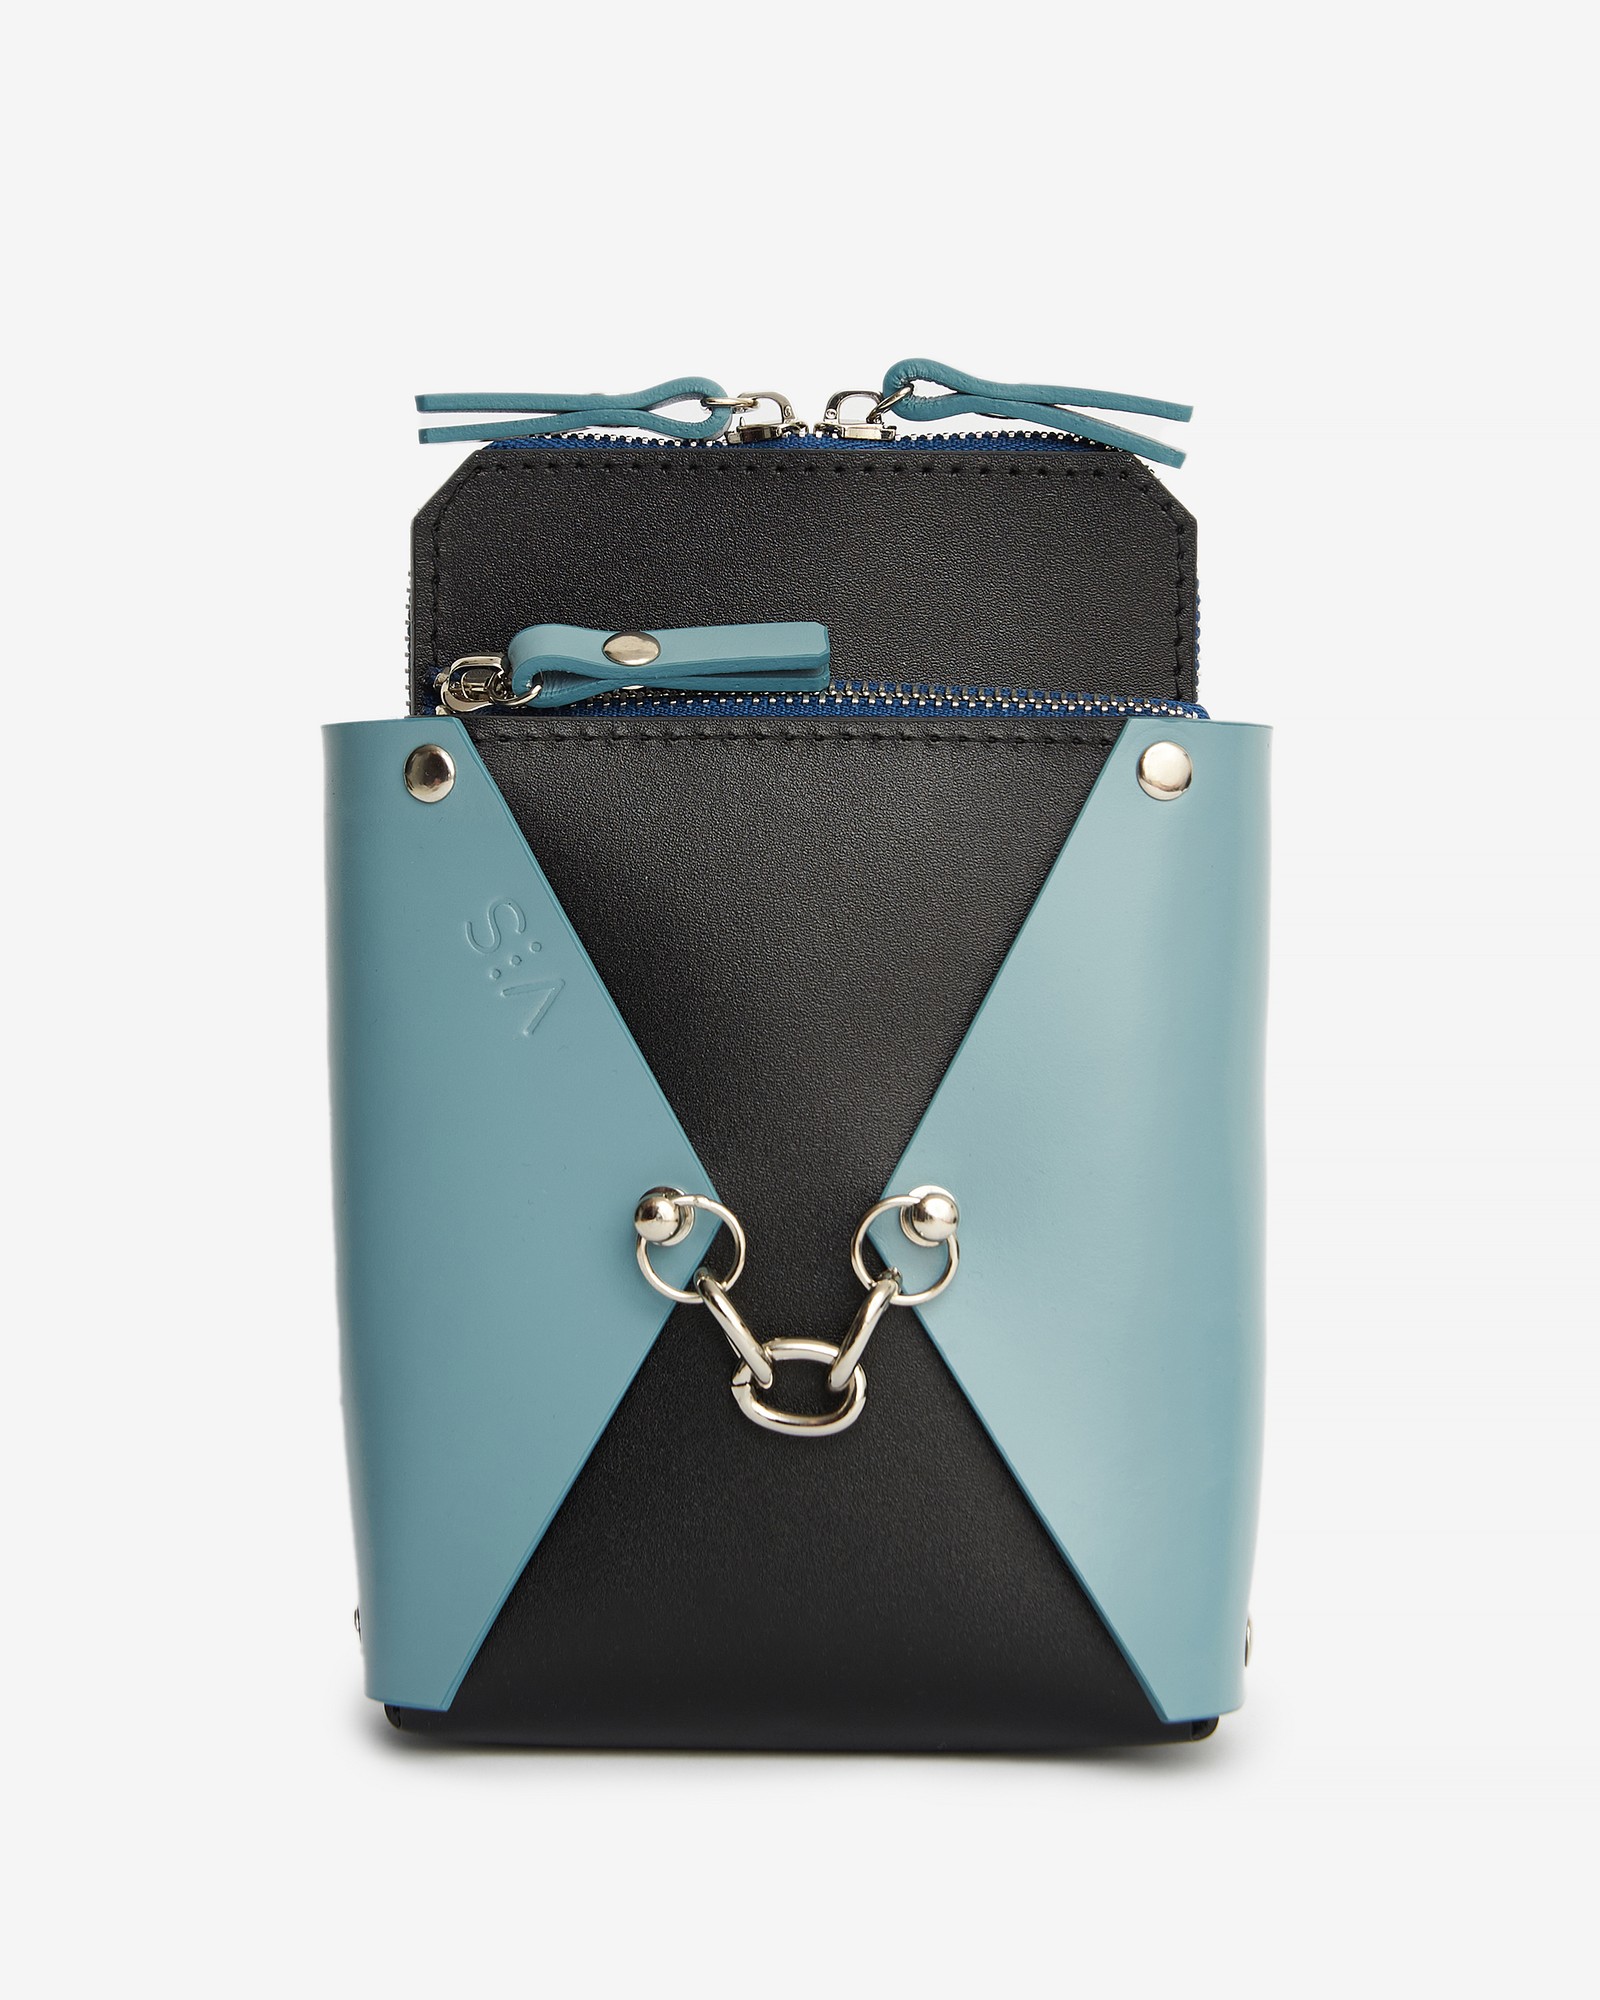 Talia leather bag in blue and black color